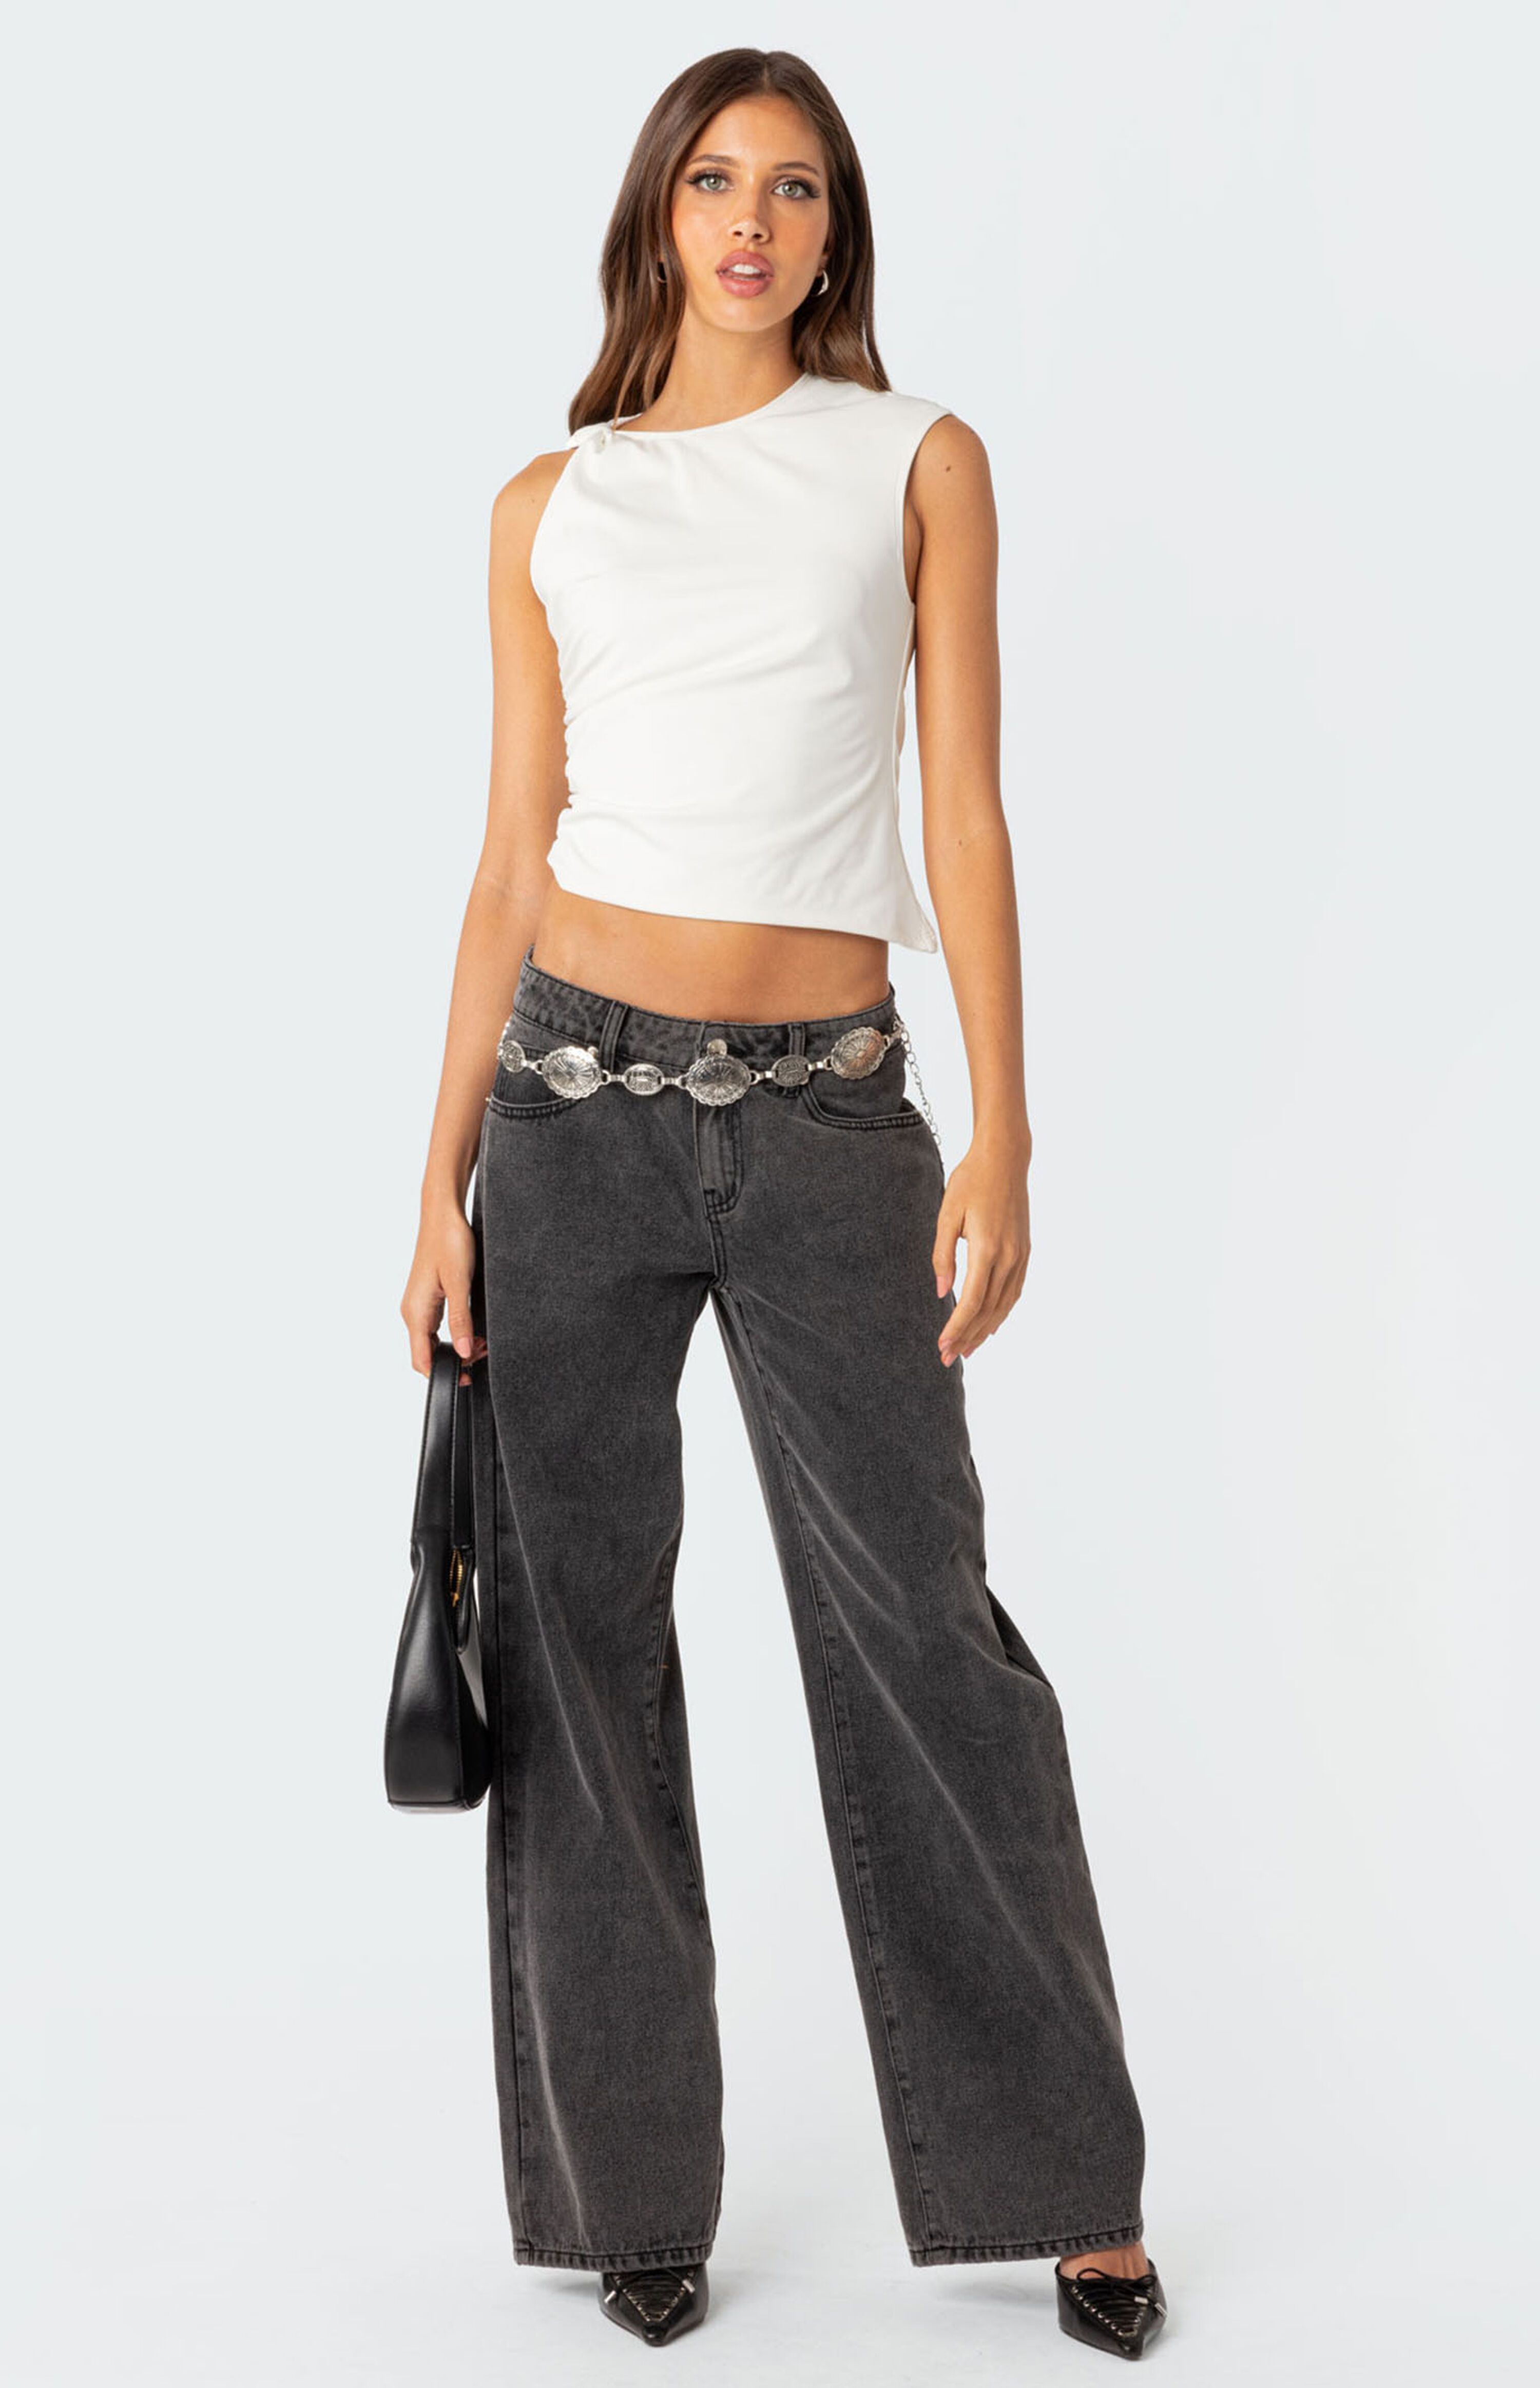 Edikted Raelynn Washed Low Rise Jeans | PacSun